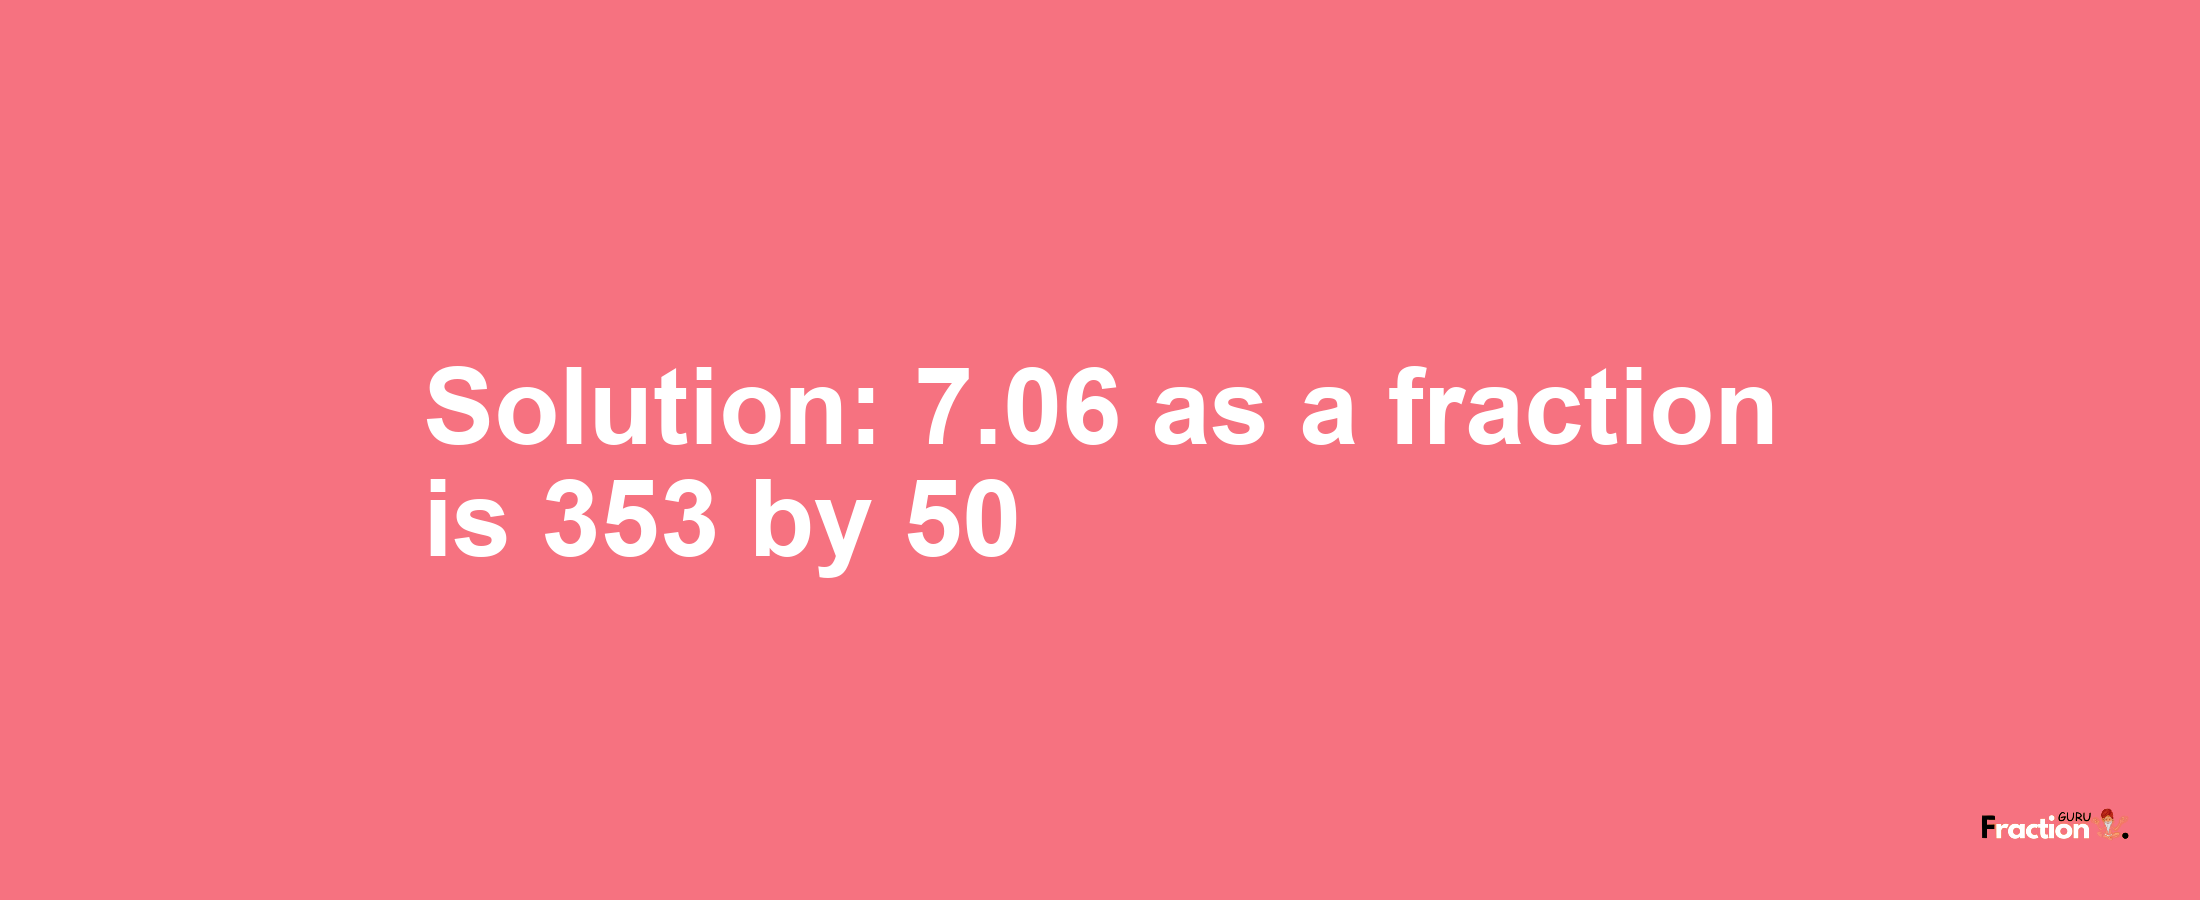 Solution:7.06 as a fraction is 353/50